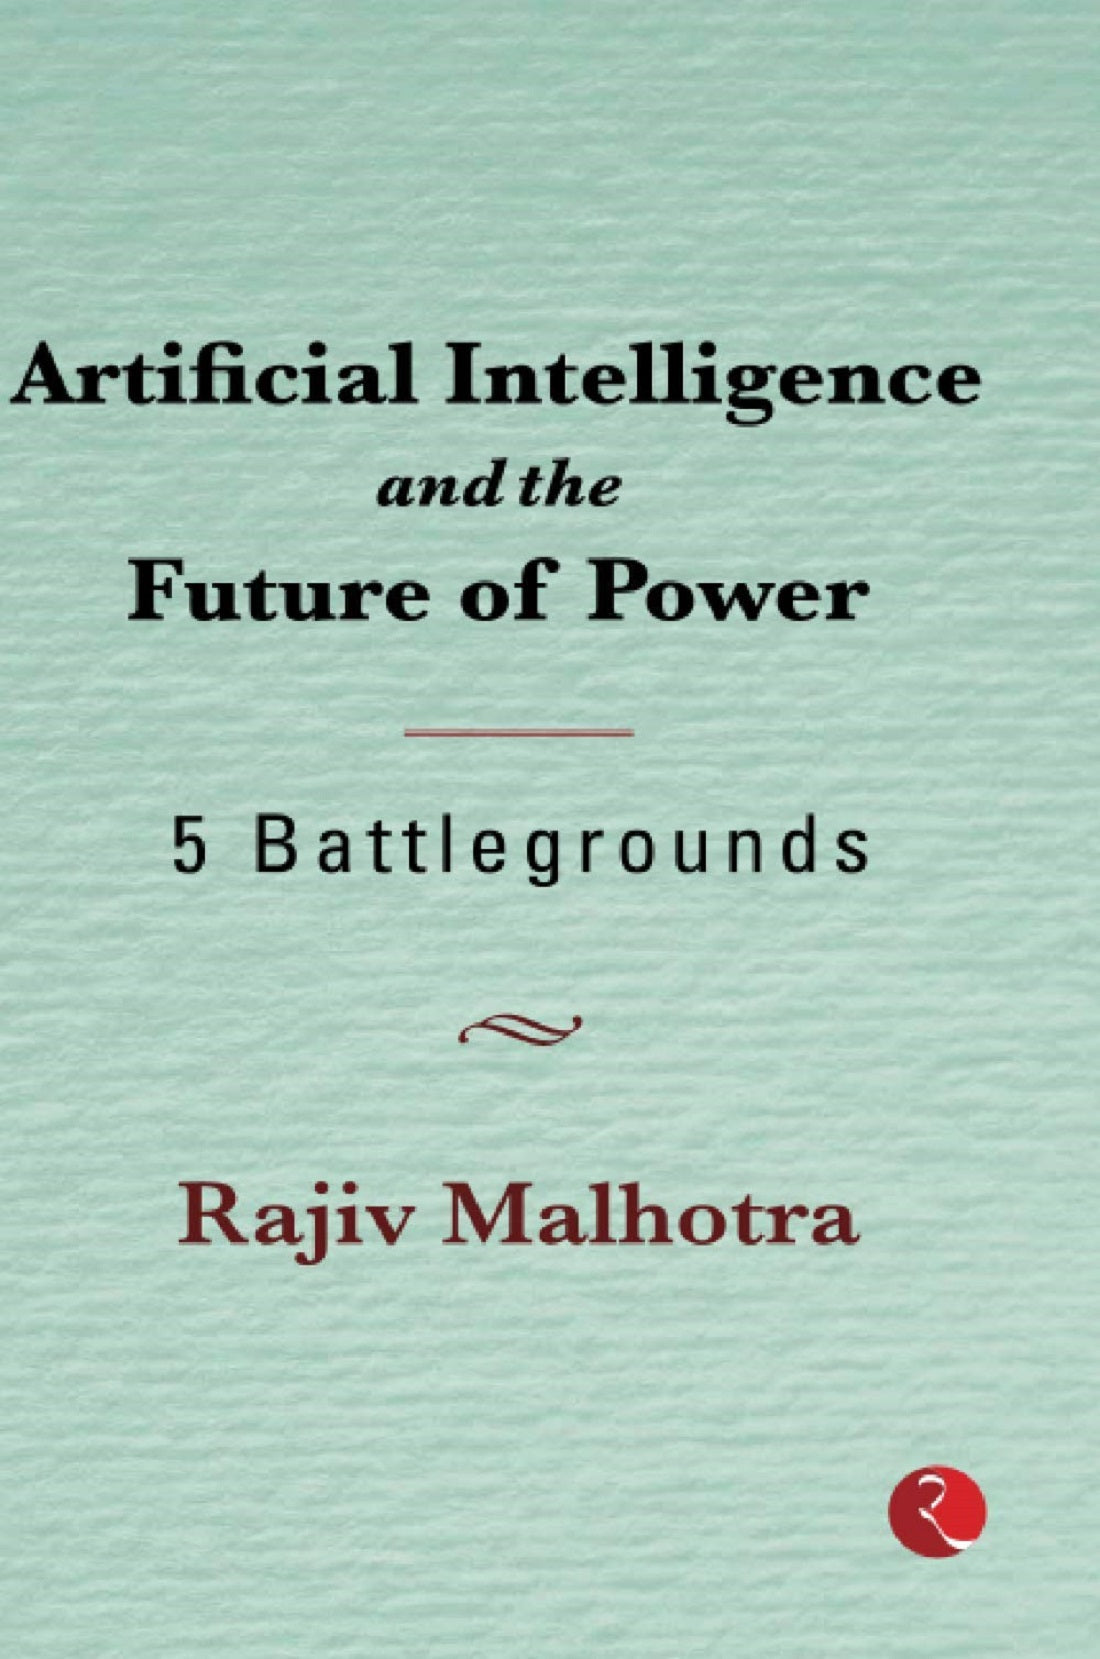 ARTIFICIAL INTELLIGENCE AND THE FUTURE OF POWER